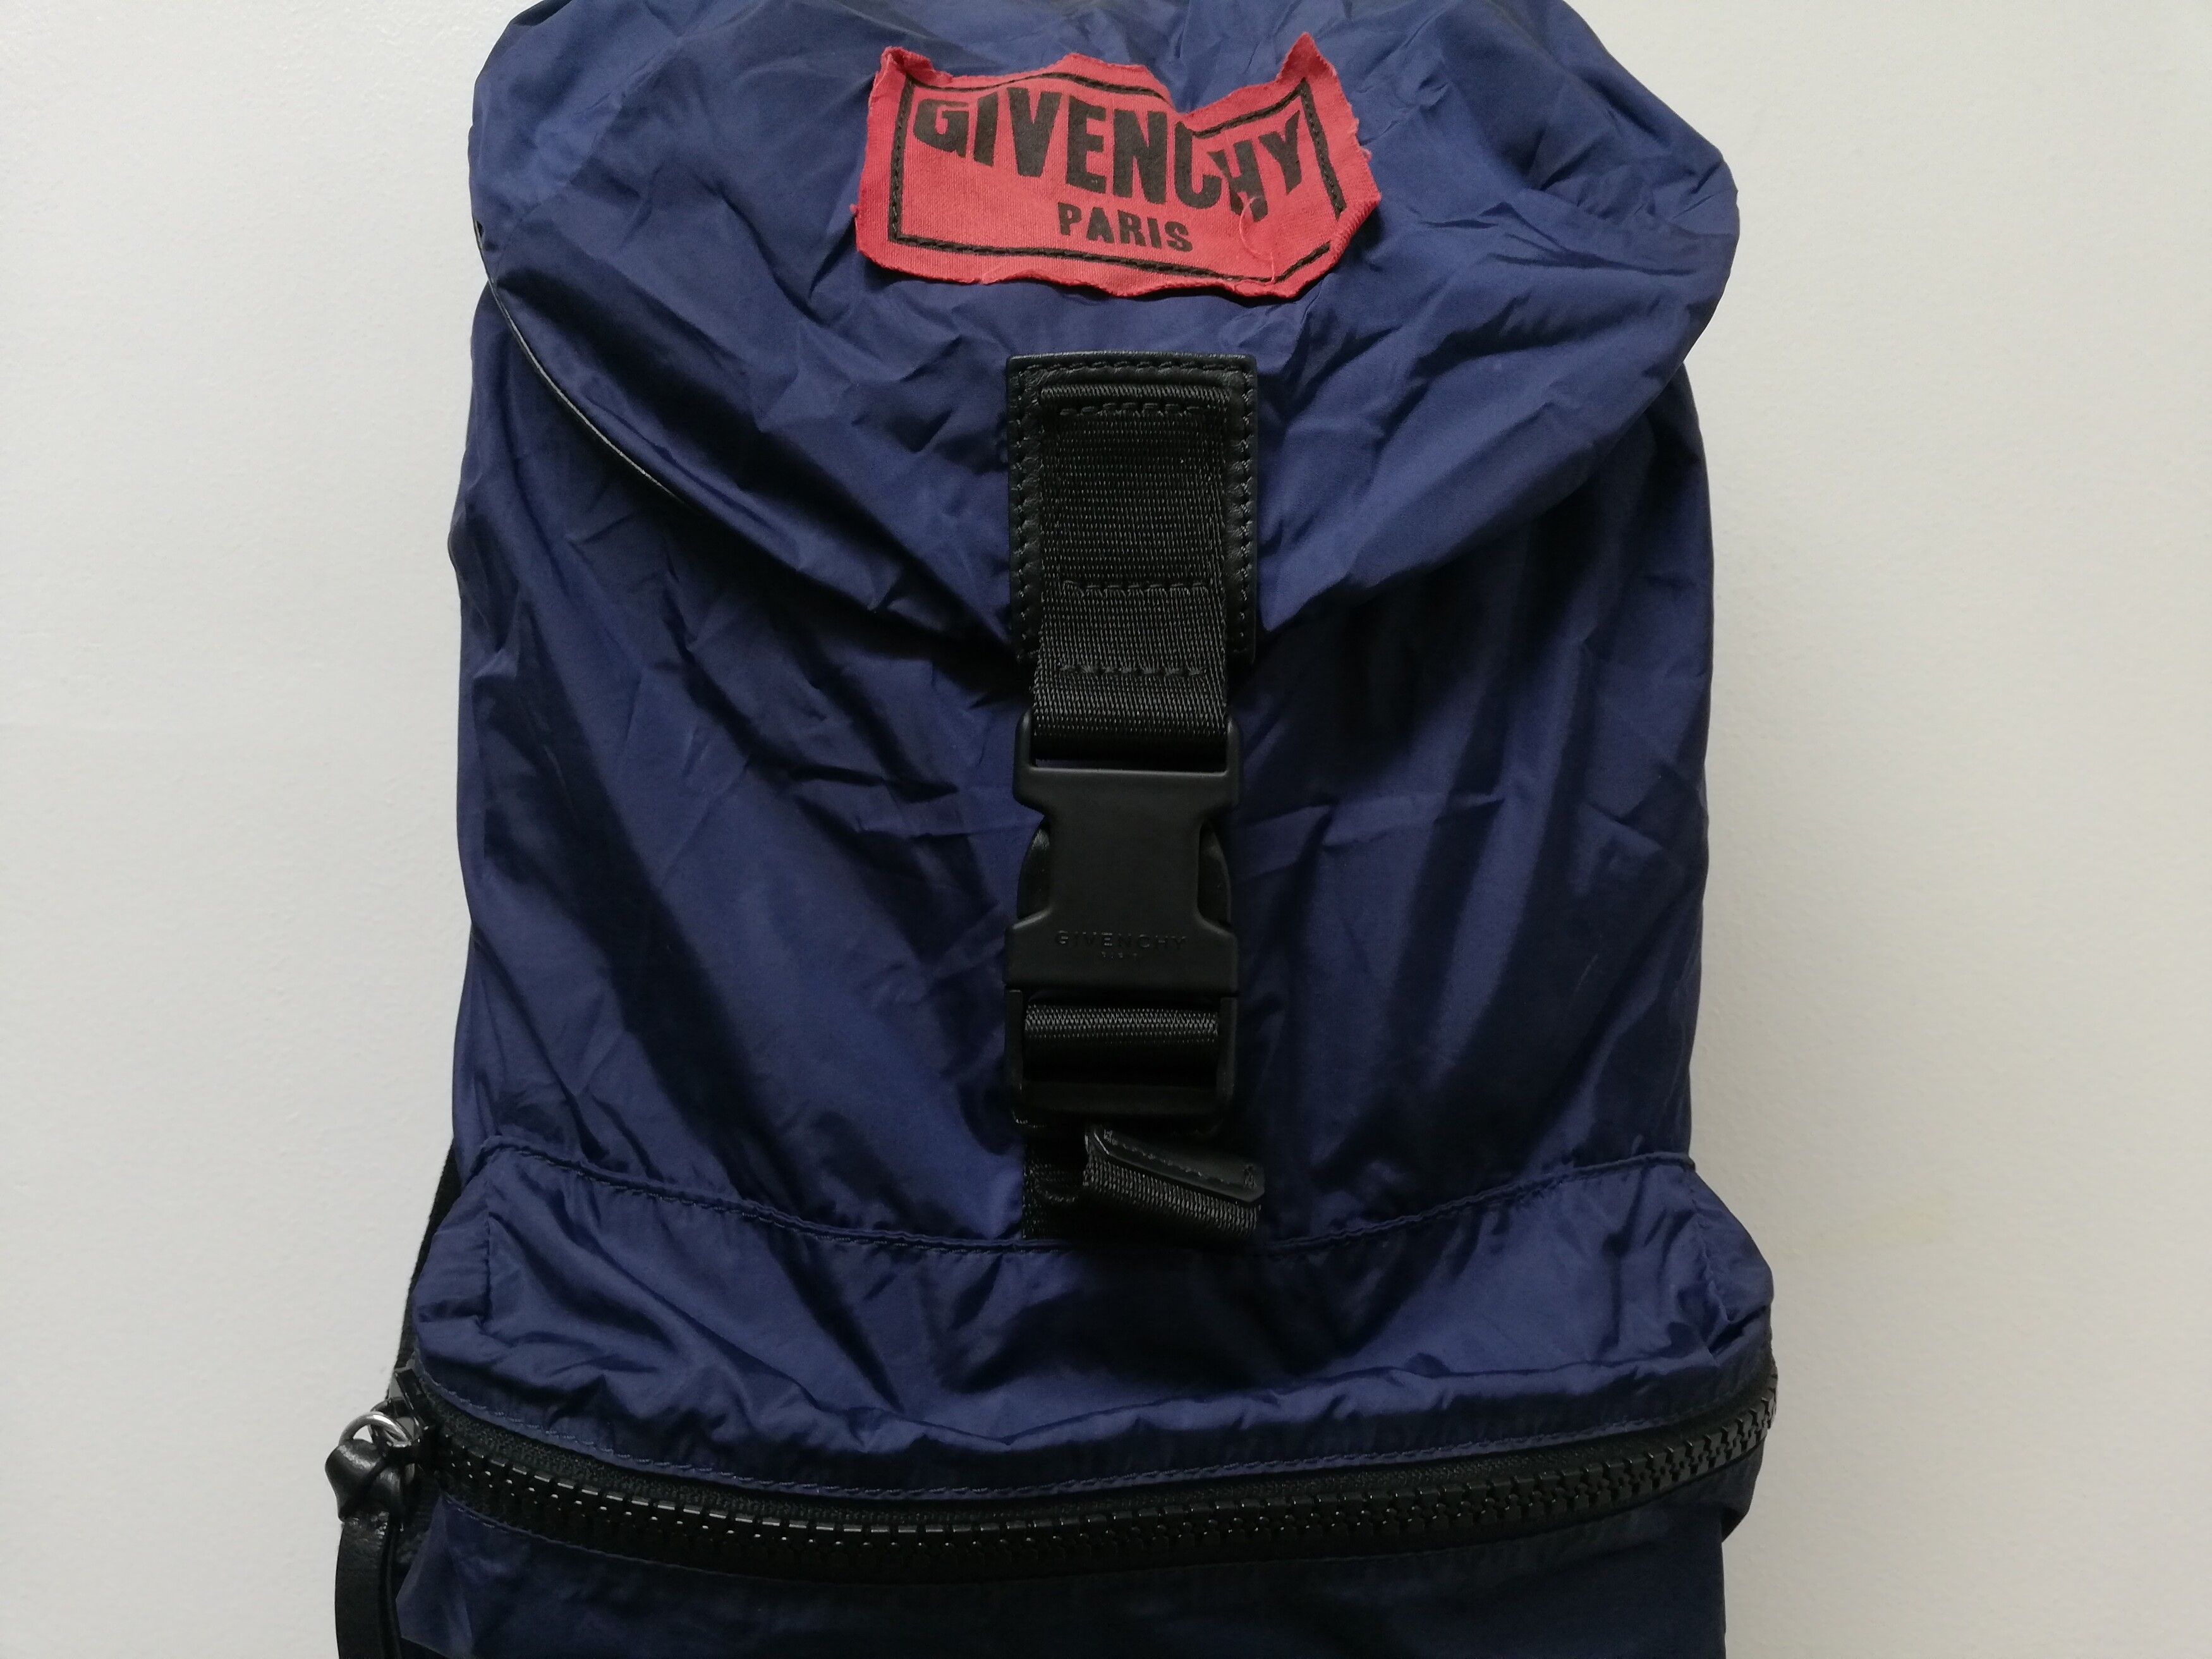 Givenchy Packable Logo Plaque Backpack - 6